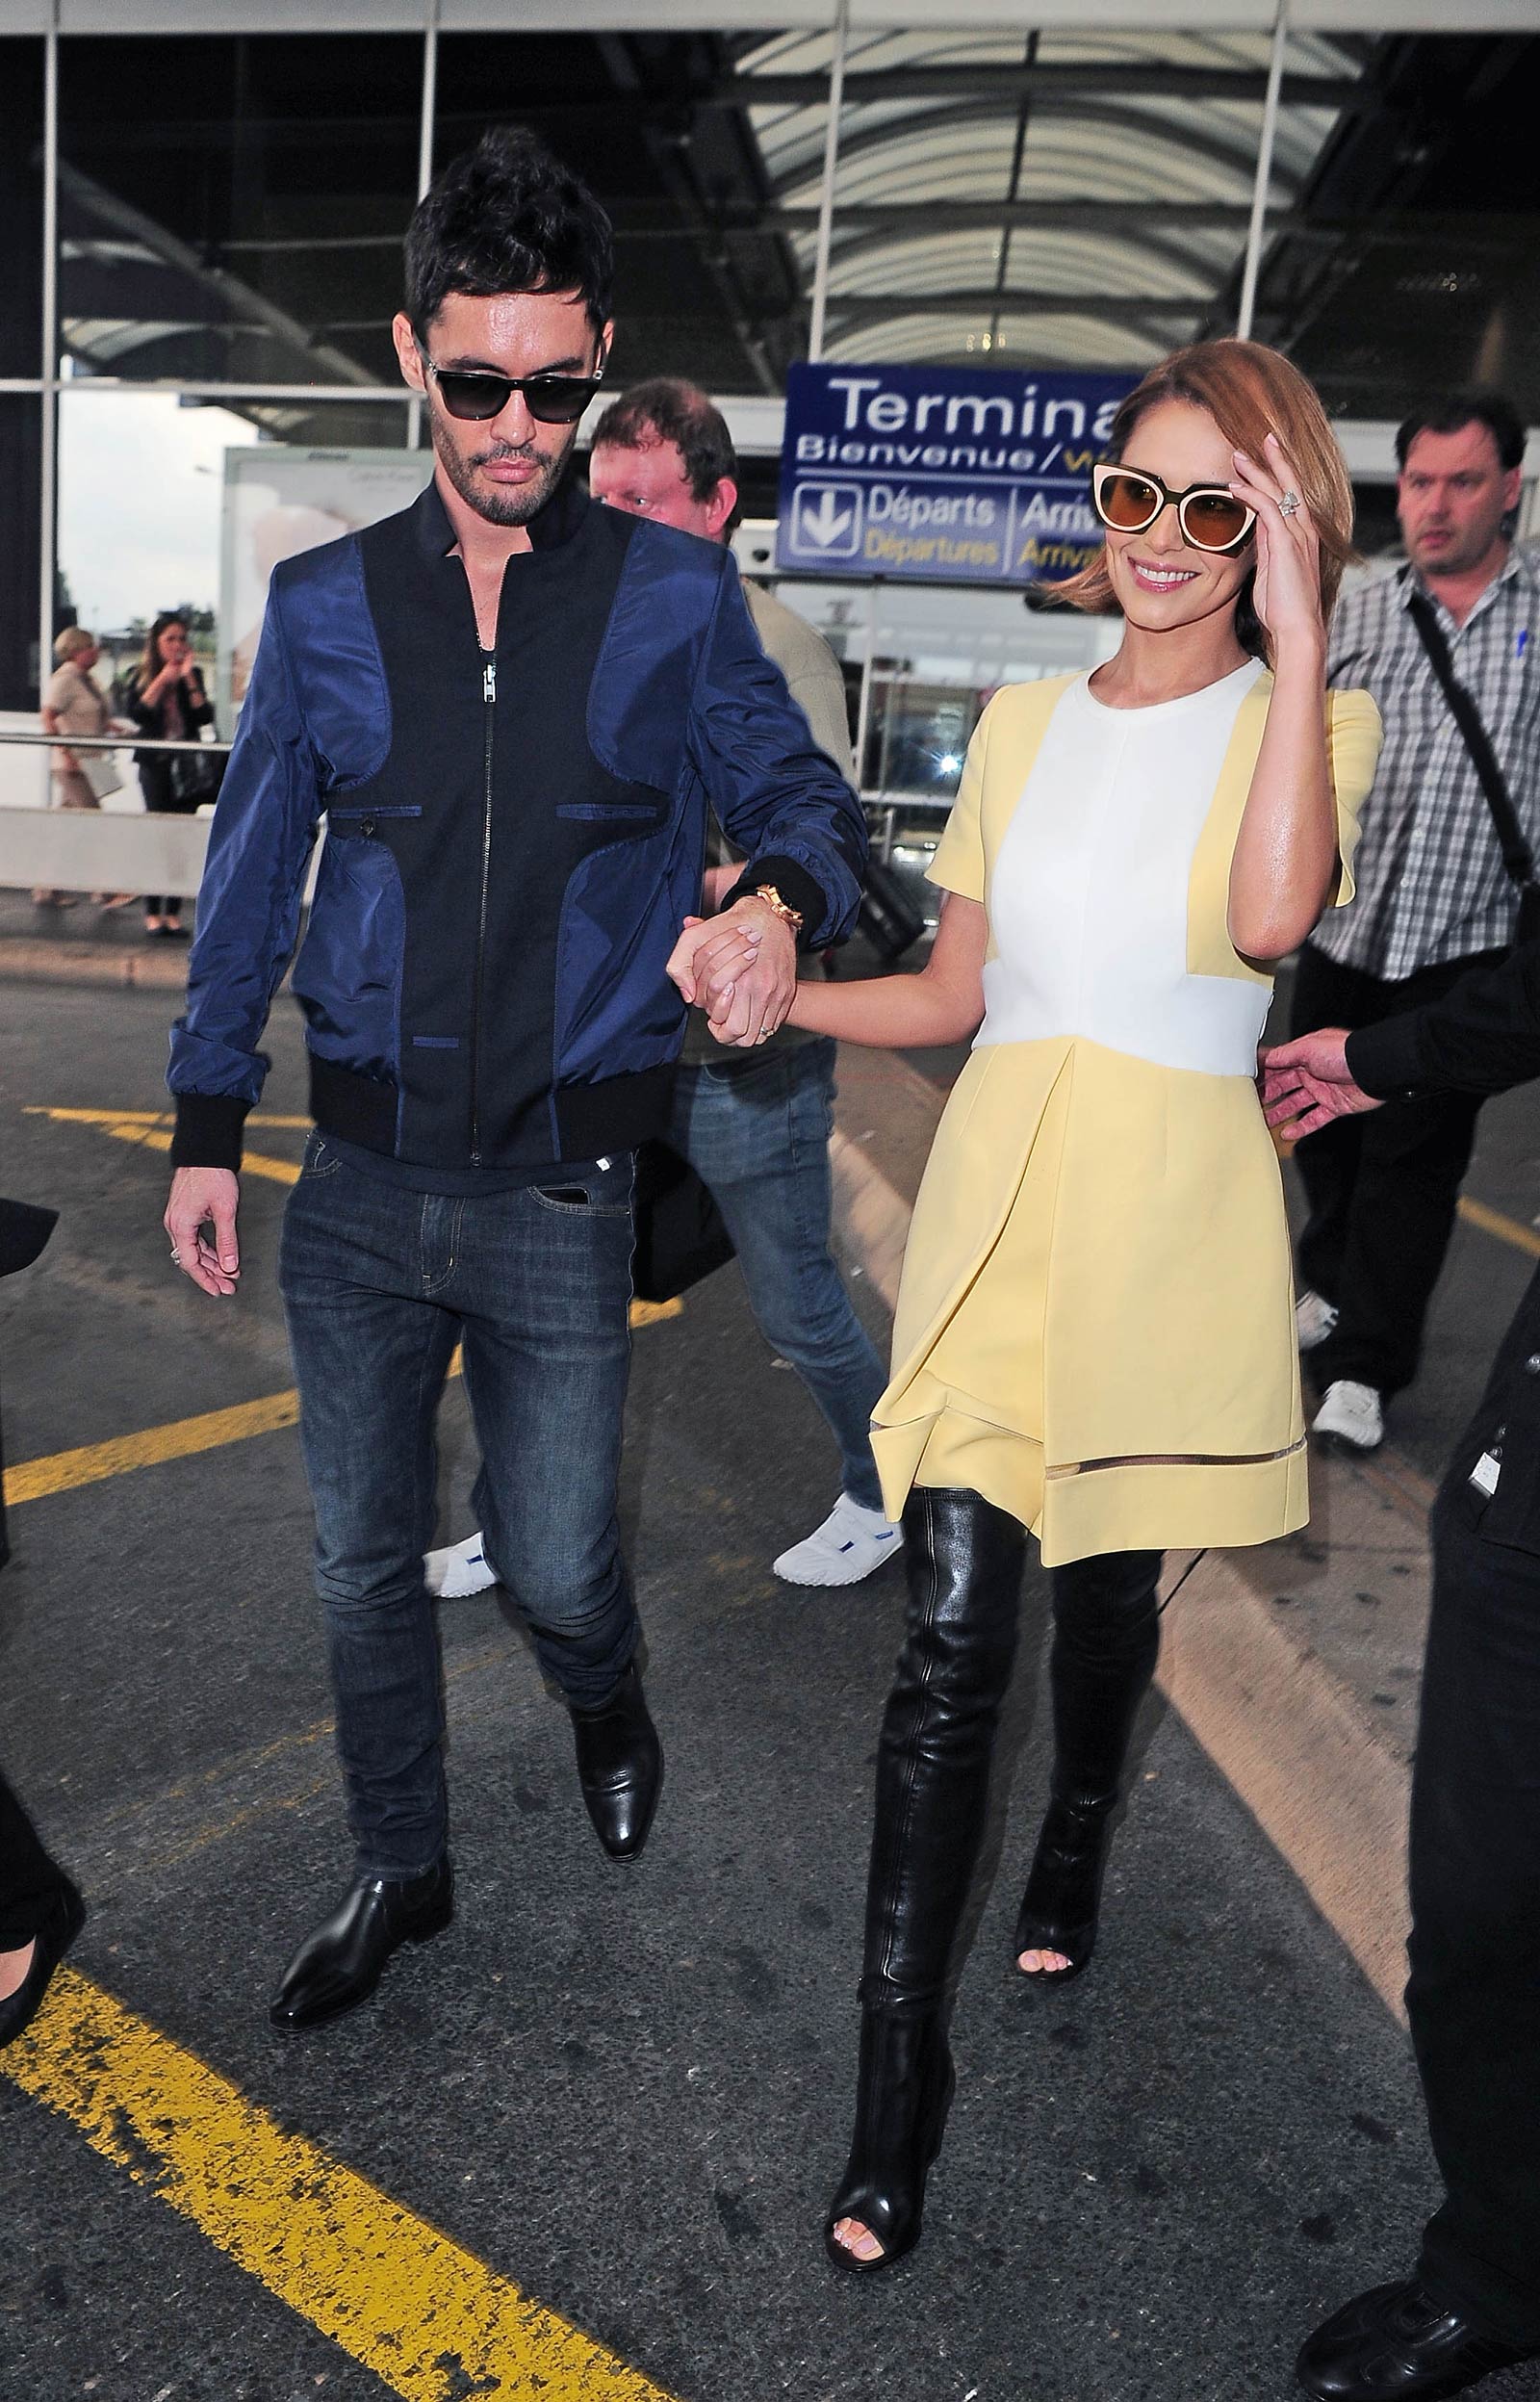 Cheryl Cole at Nice Cote d’Azur Airport in France